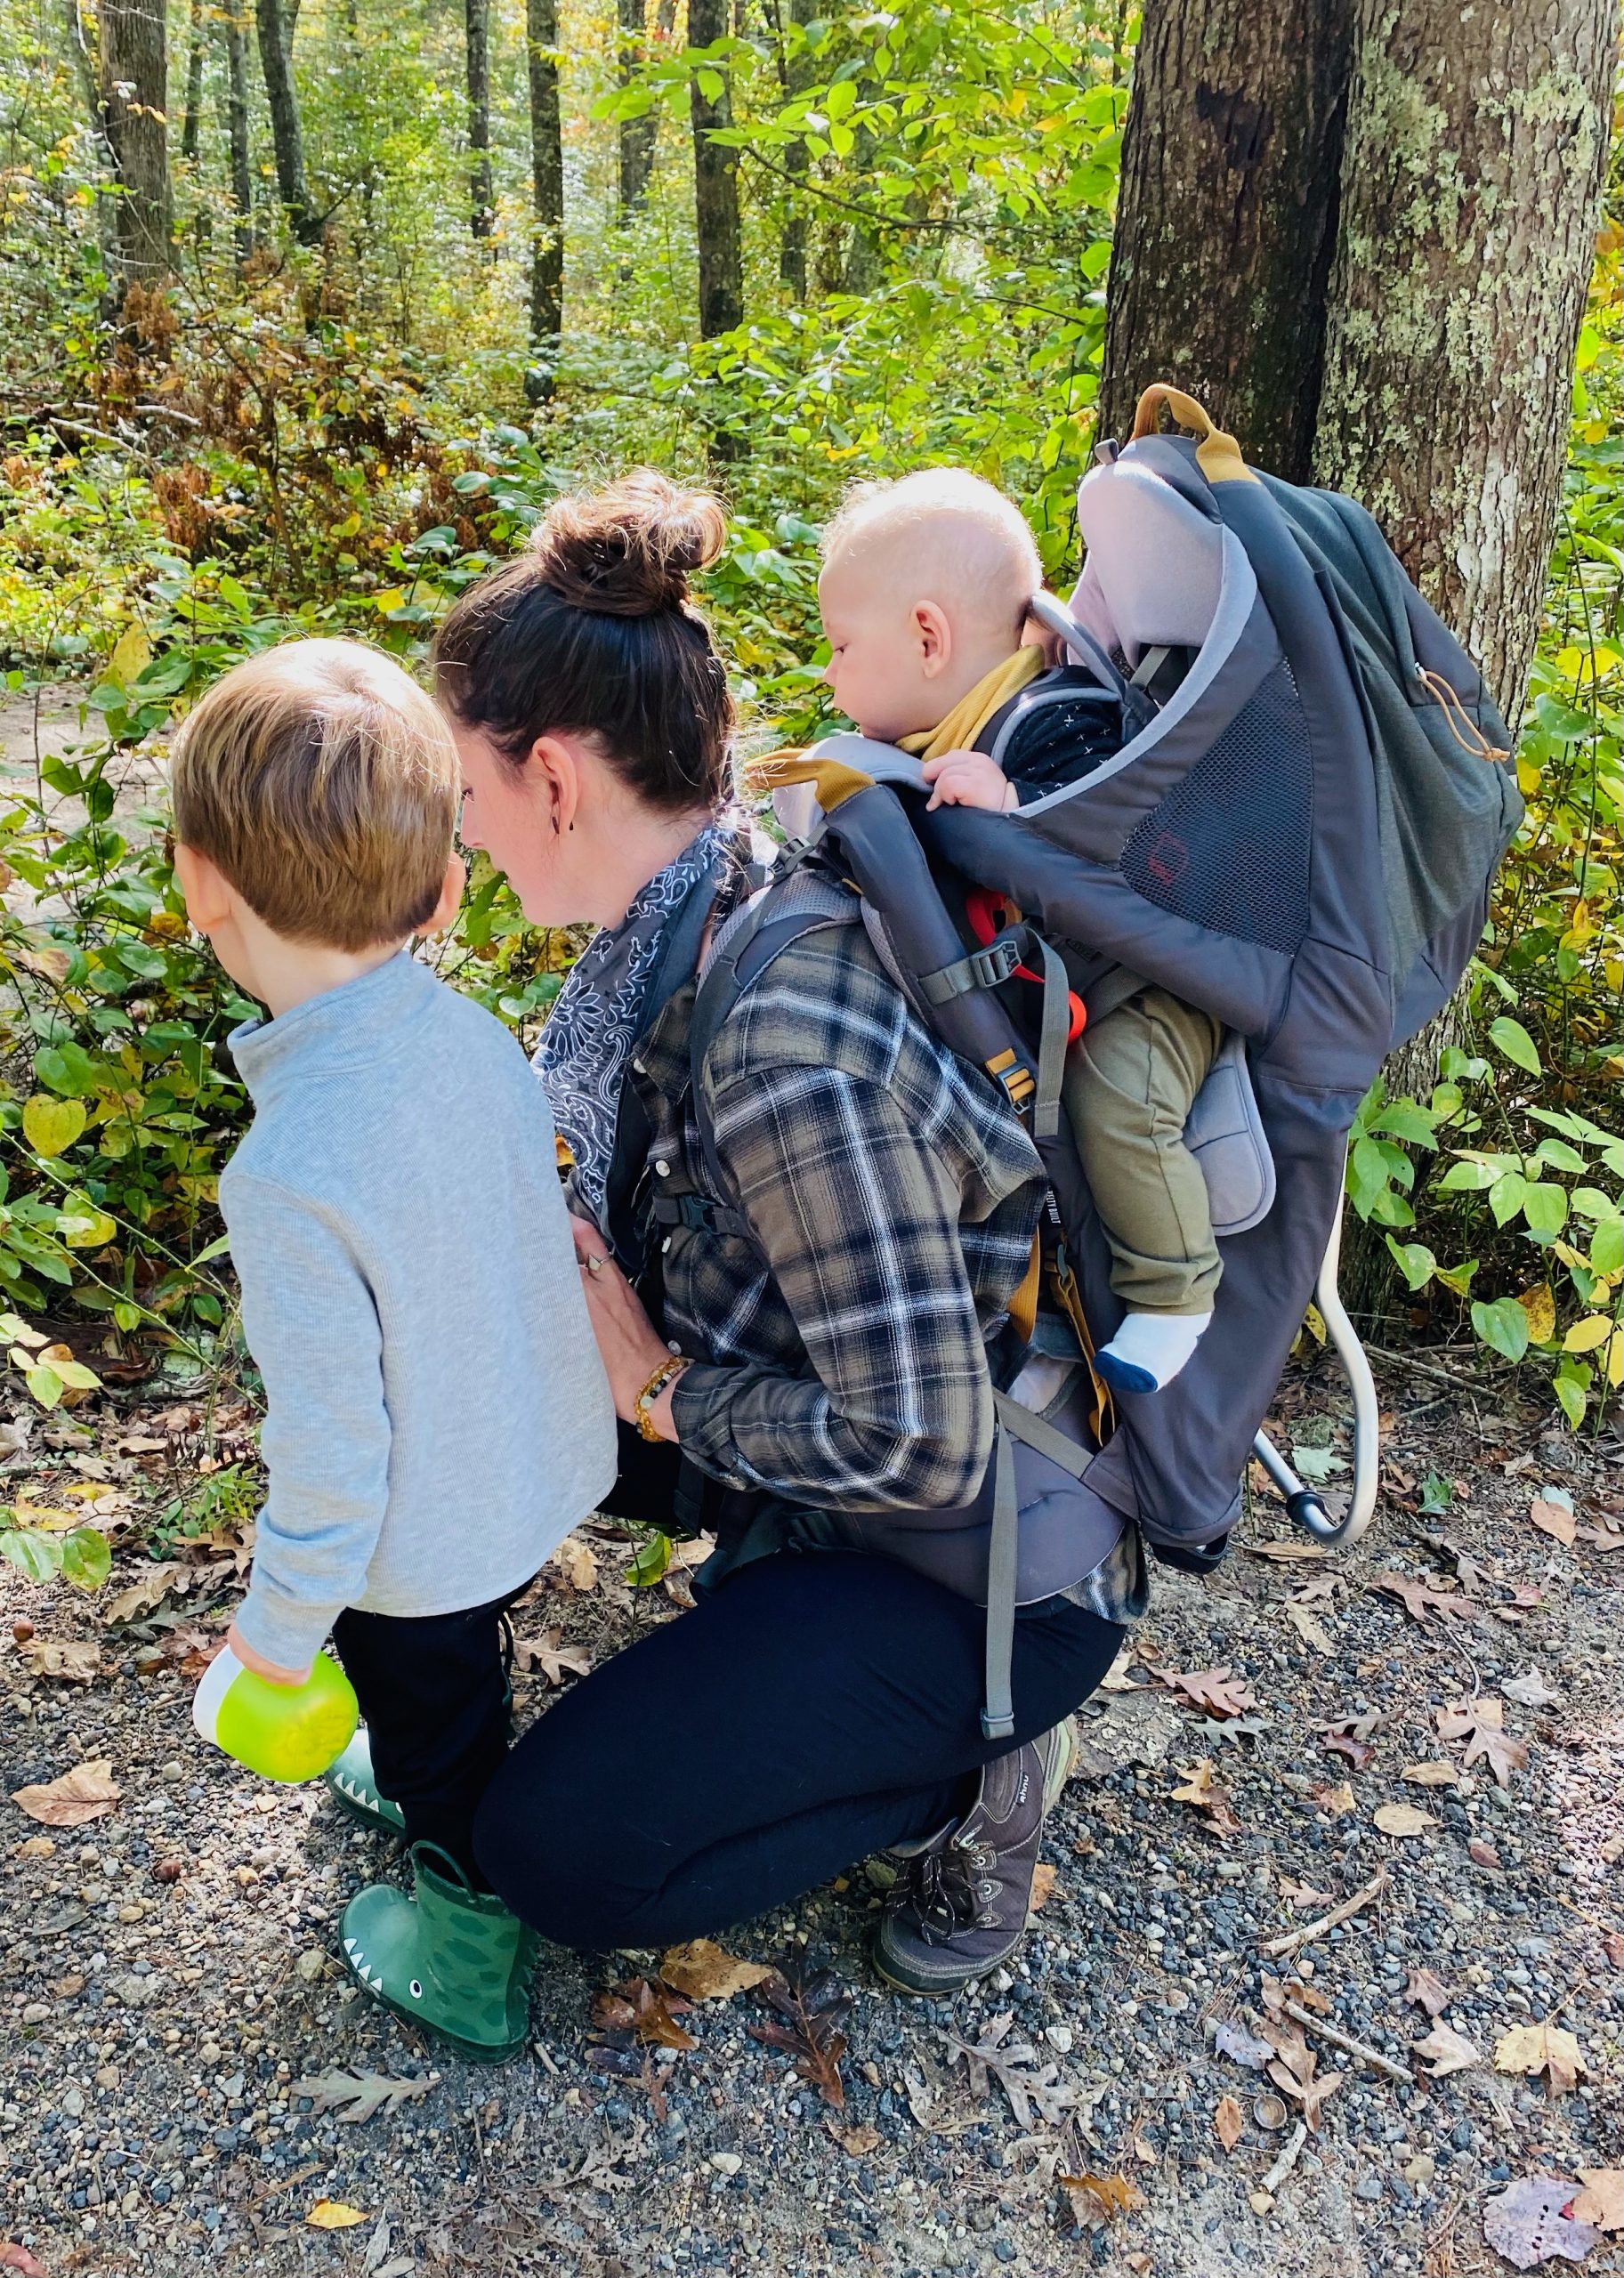 Mom on a hiking trail with a toddler by her side and a baby on her back in a backpack style carrier